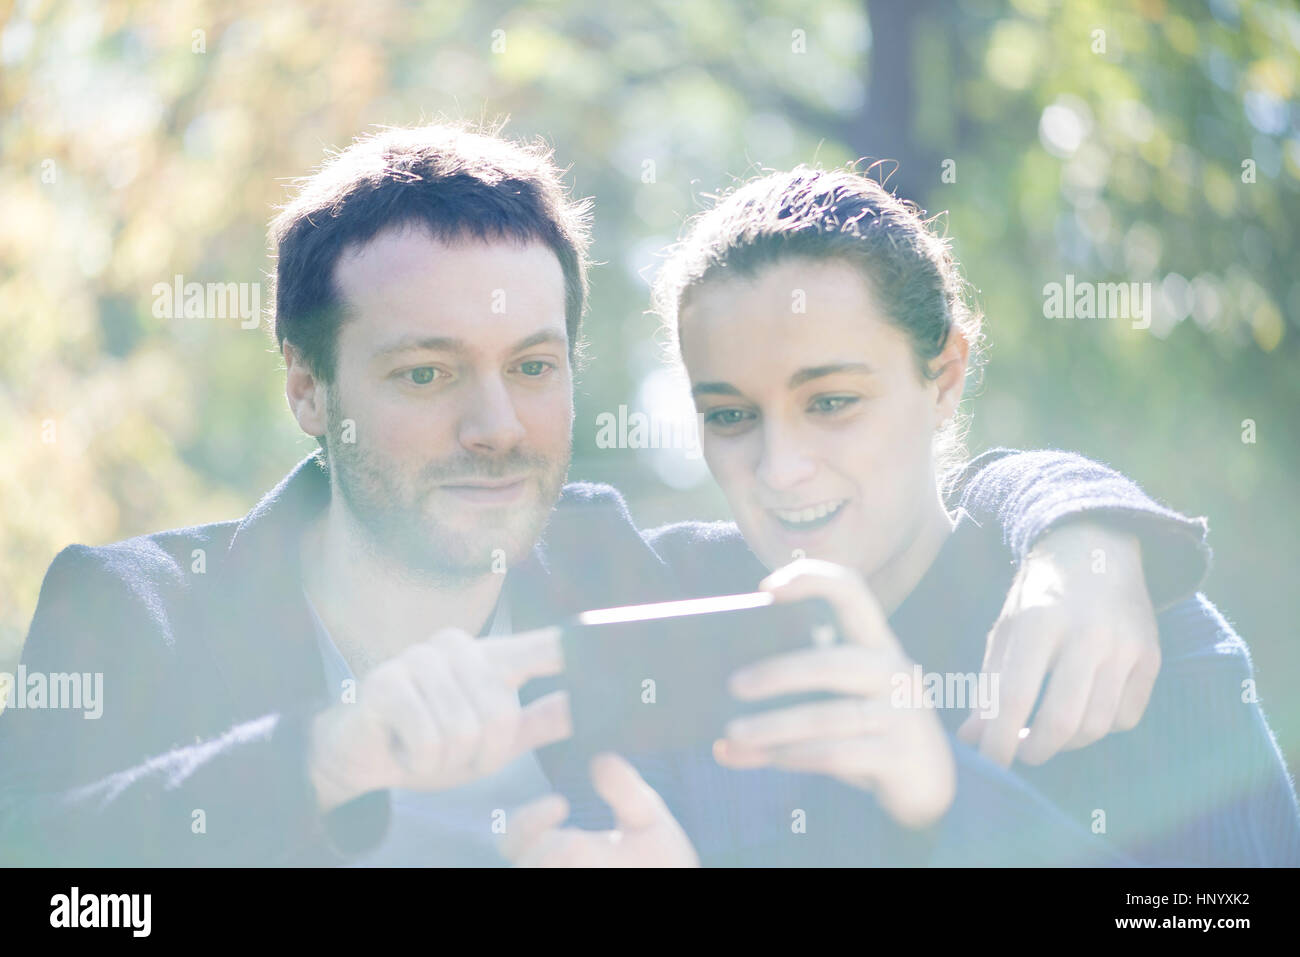 Man getting camera ready for selfie with girlfriend Stock Photo